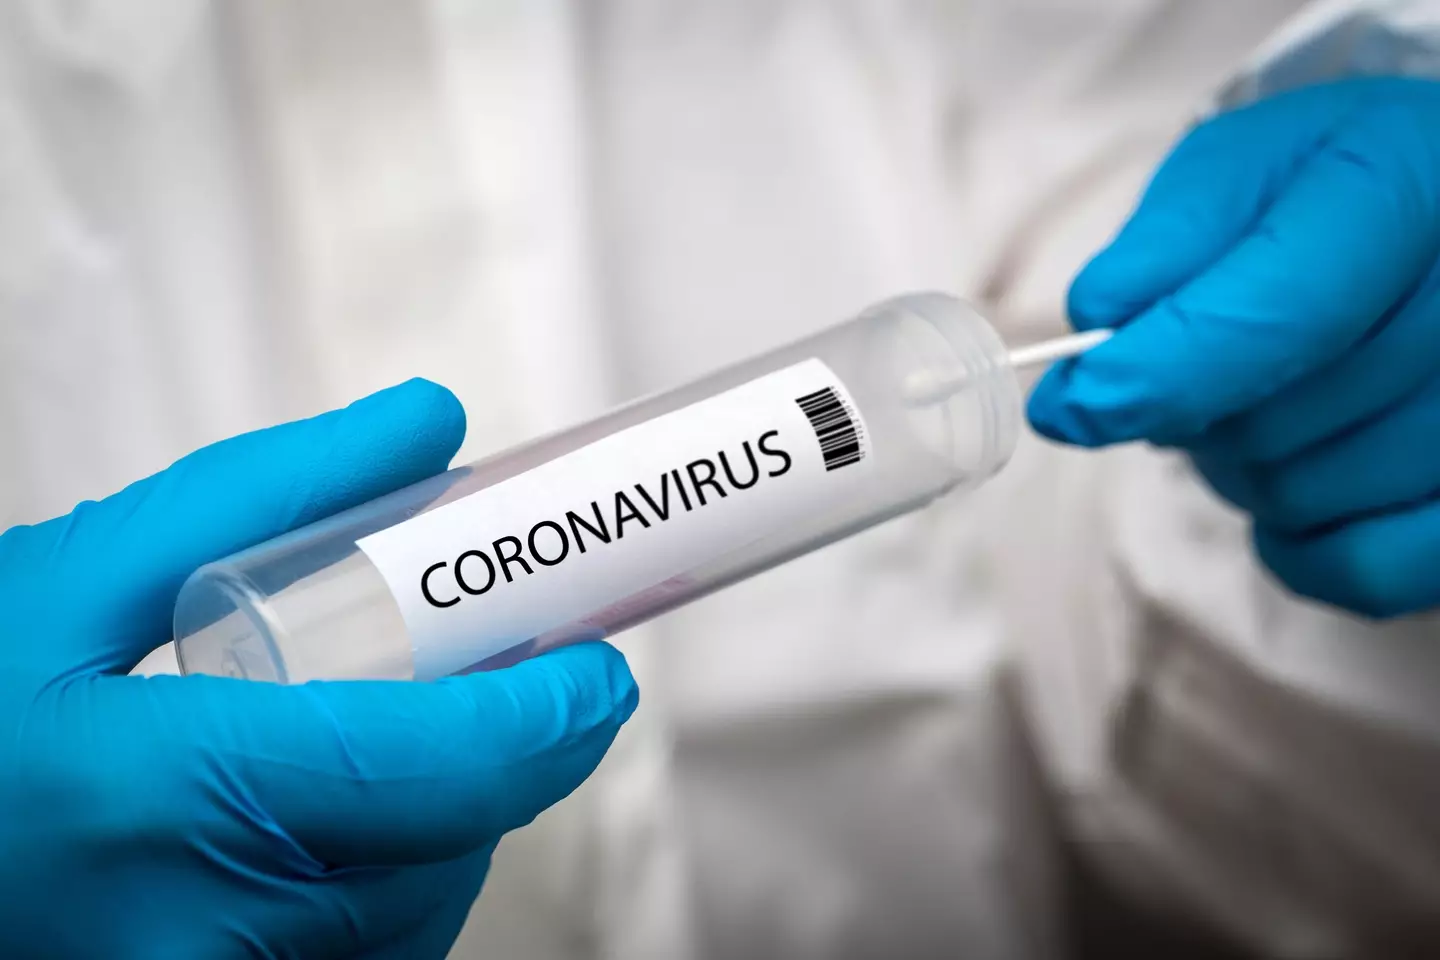 If an employee has coronavirus, they can get a note online from NHS 111 rather than going to a GP or hospital.